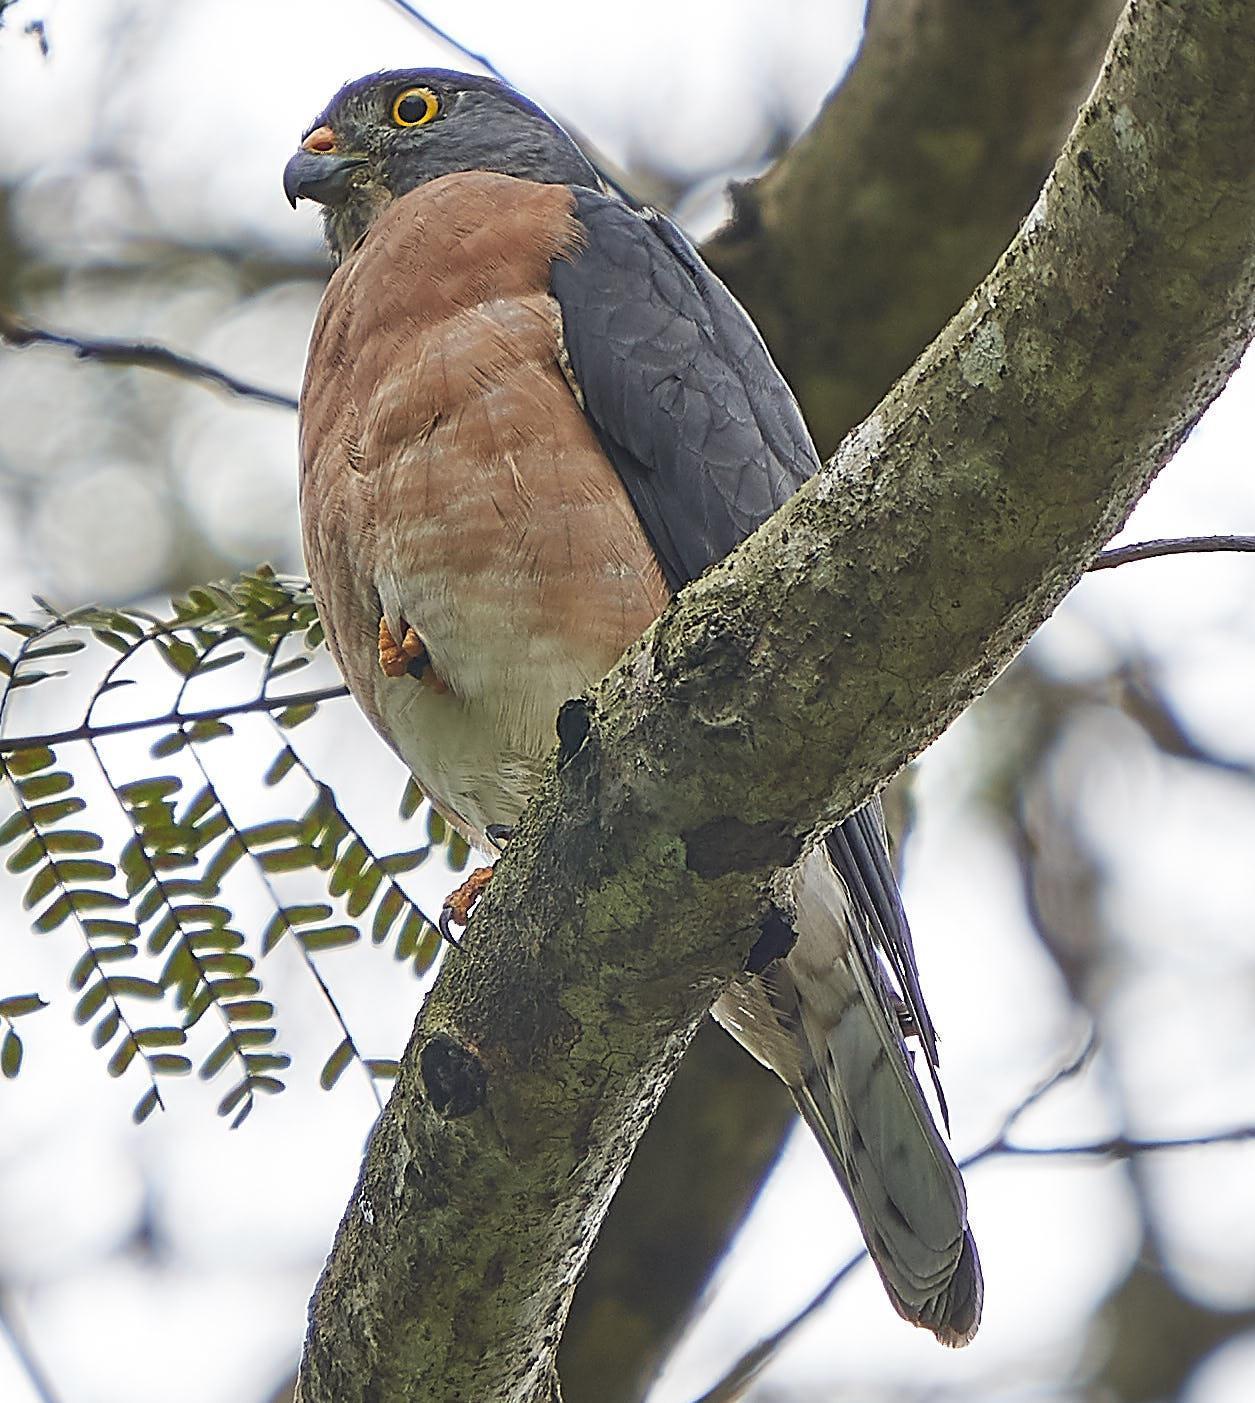 Chinese Sparrowhawk Photo by Steven Cheong